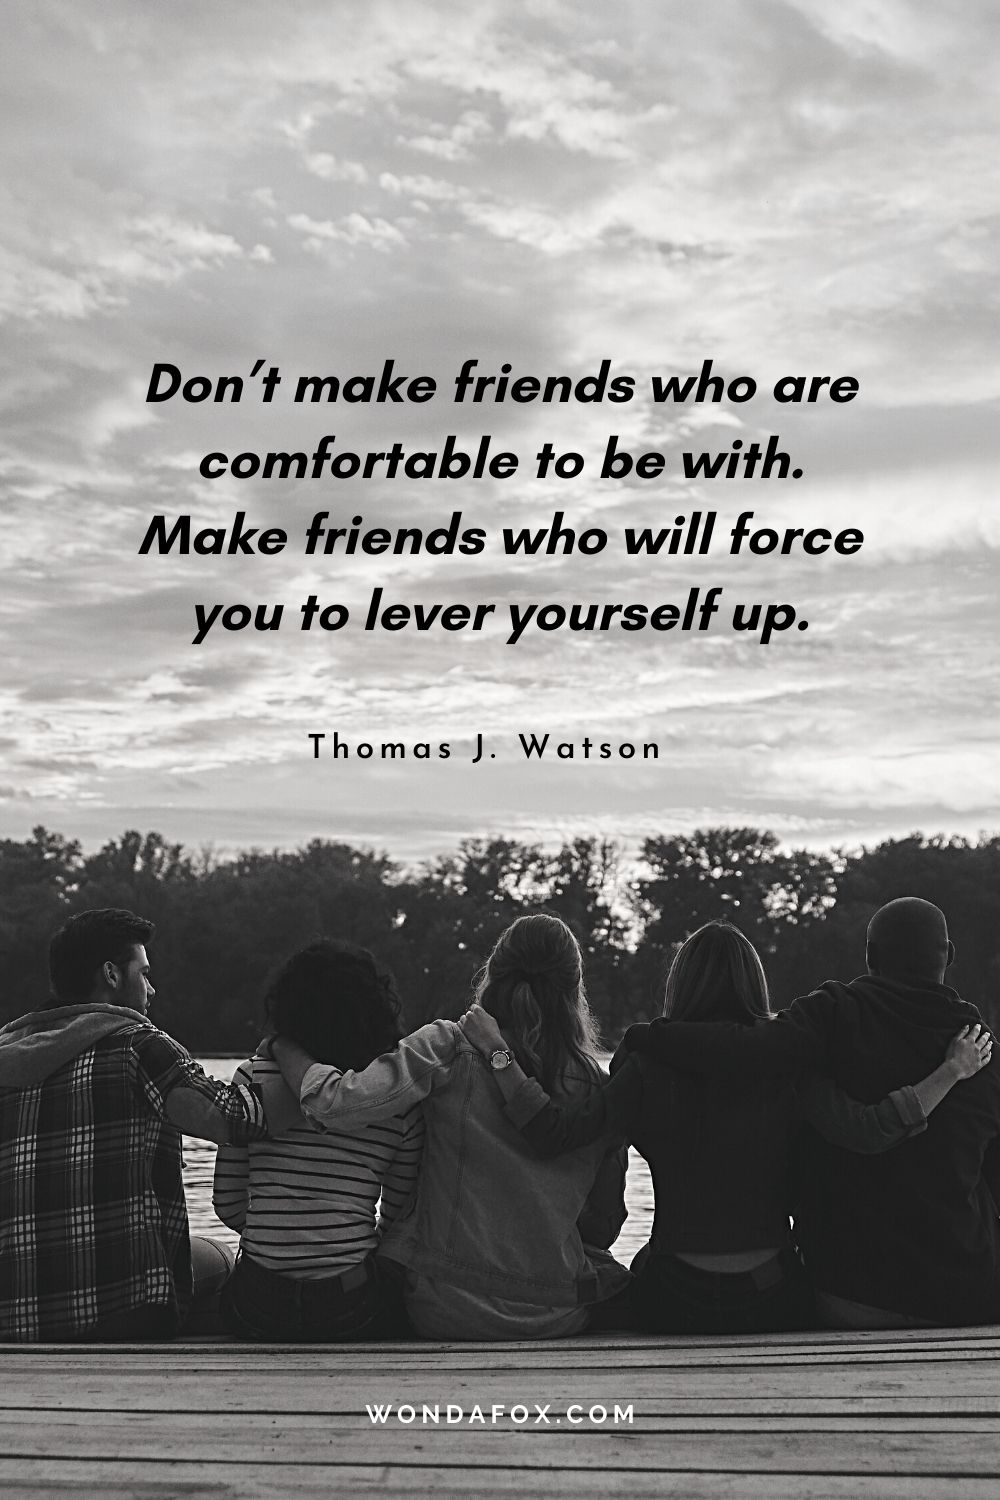 Don’t make friends who are comfortable to be with. Make friends who will force you to lever yourself up.